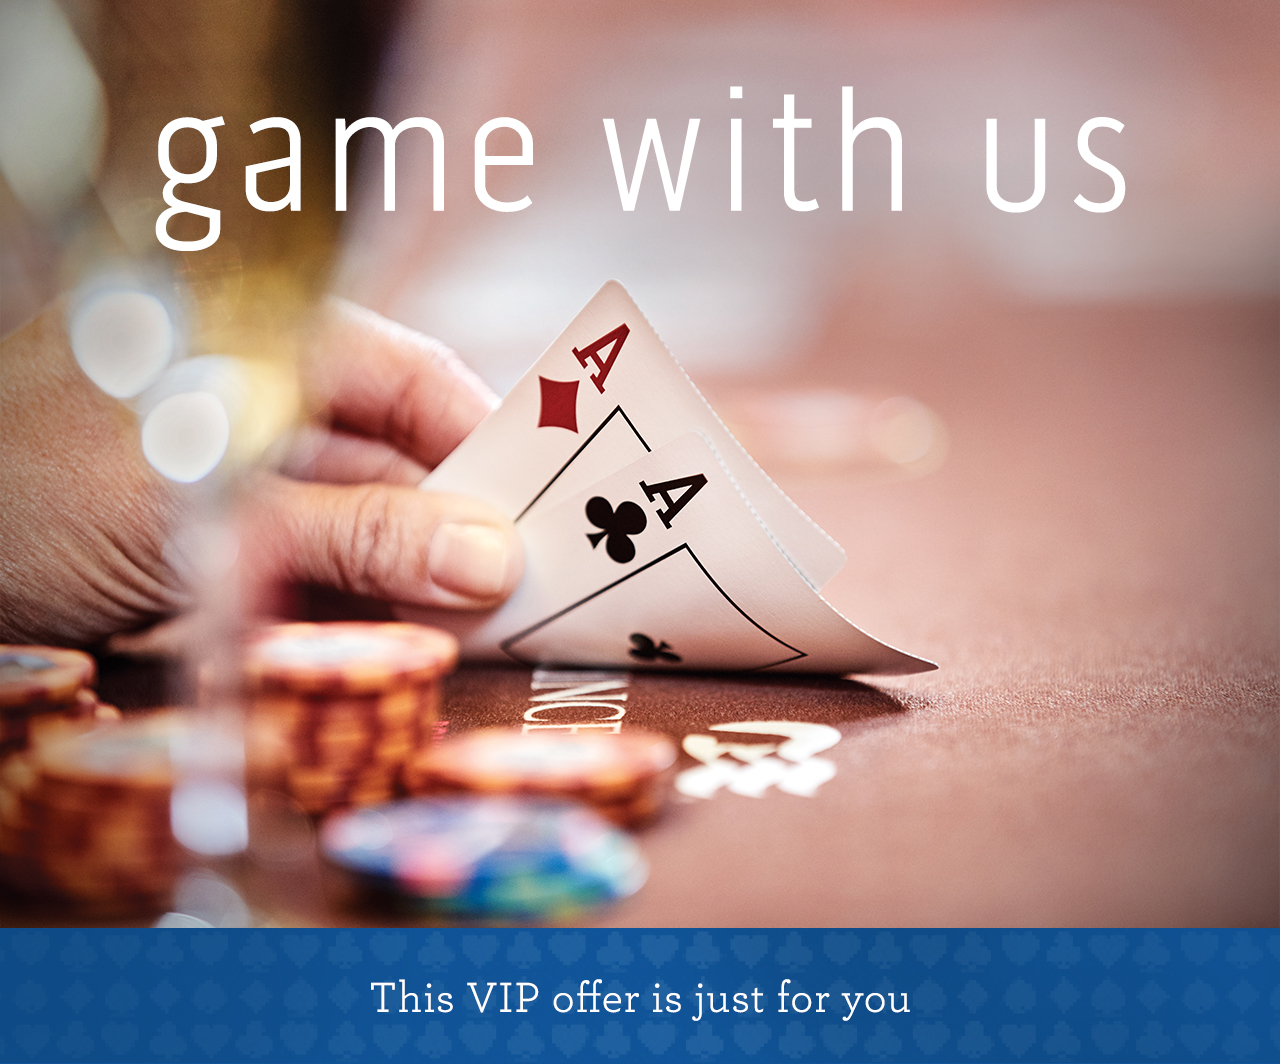 Close-up image of a glass of champagne, casino chips, and a hand revealing two ace cards | game with us - This VIP offer is just for you